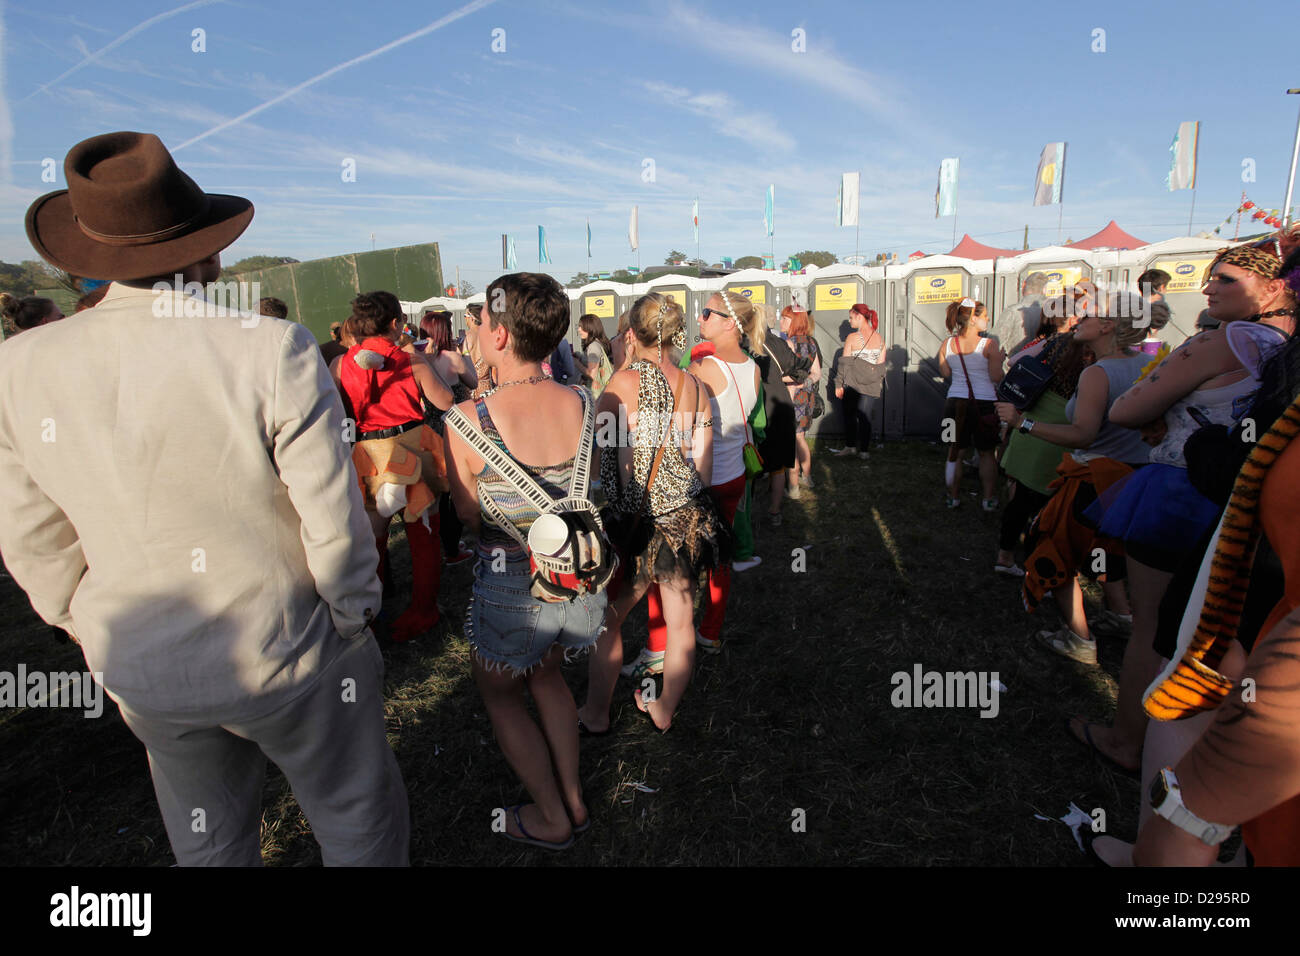 queues for festival toilets at BESTIVAL FESTIVAL, ISLE OF WHITE, SEPTEMBER 2012 Stock Photo